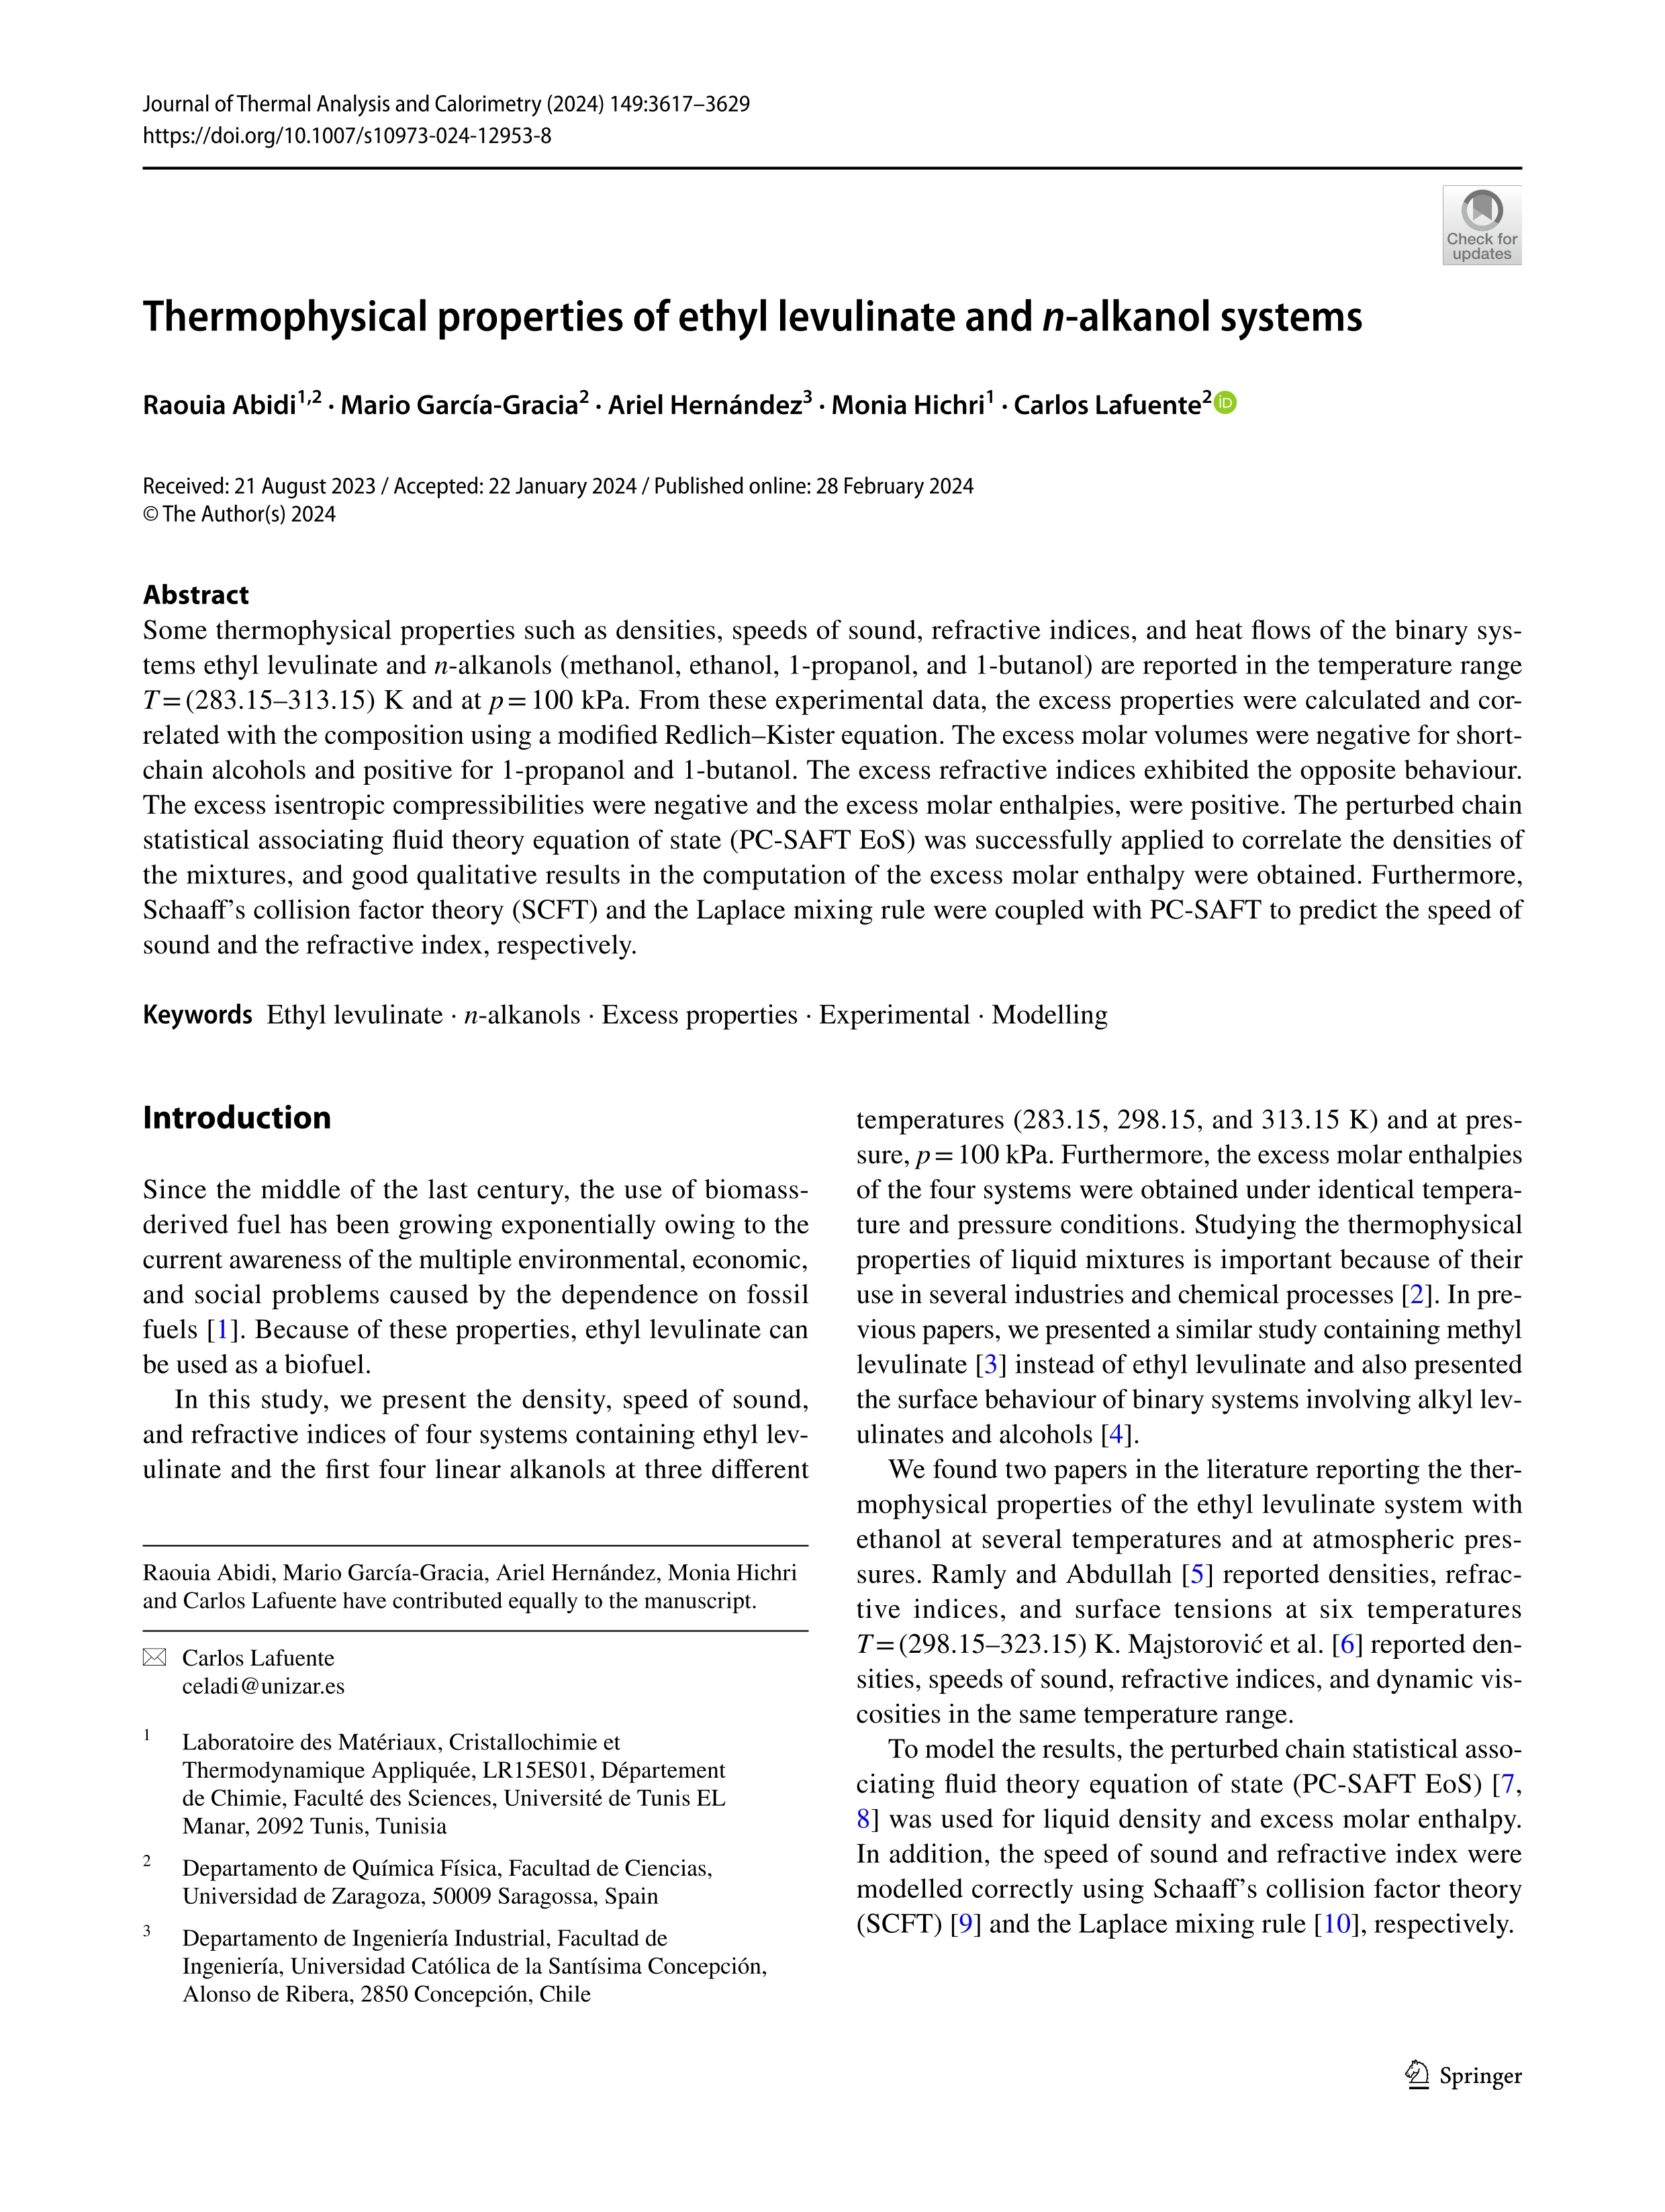 Thermophysical properties of ethyl levulinate and n-alkanol systems